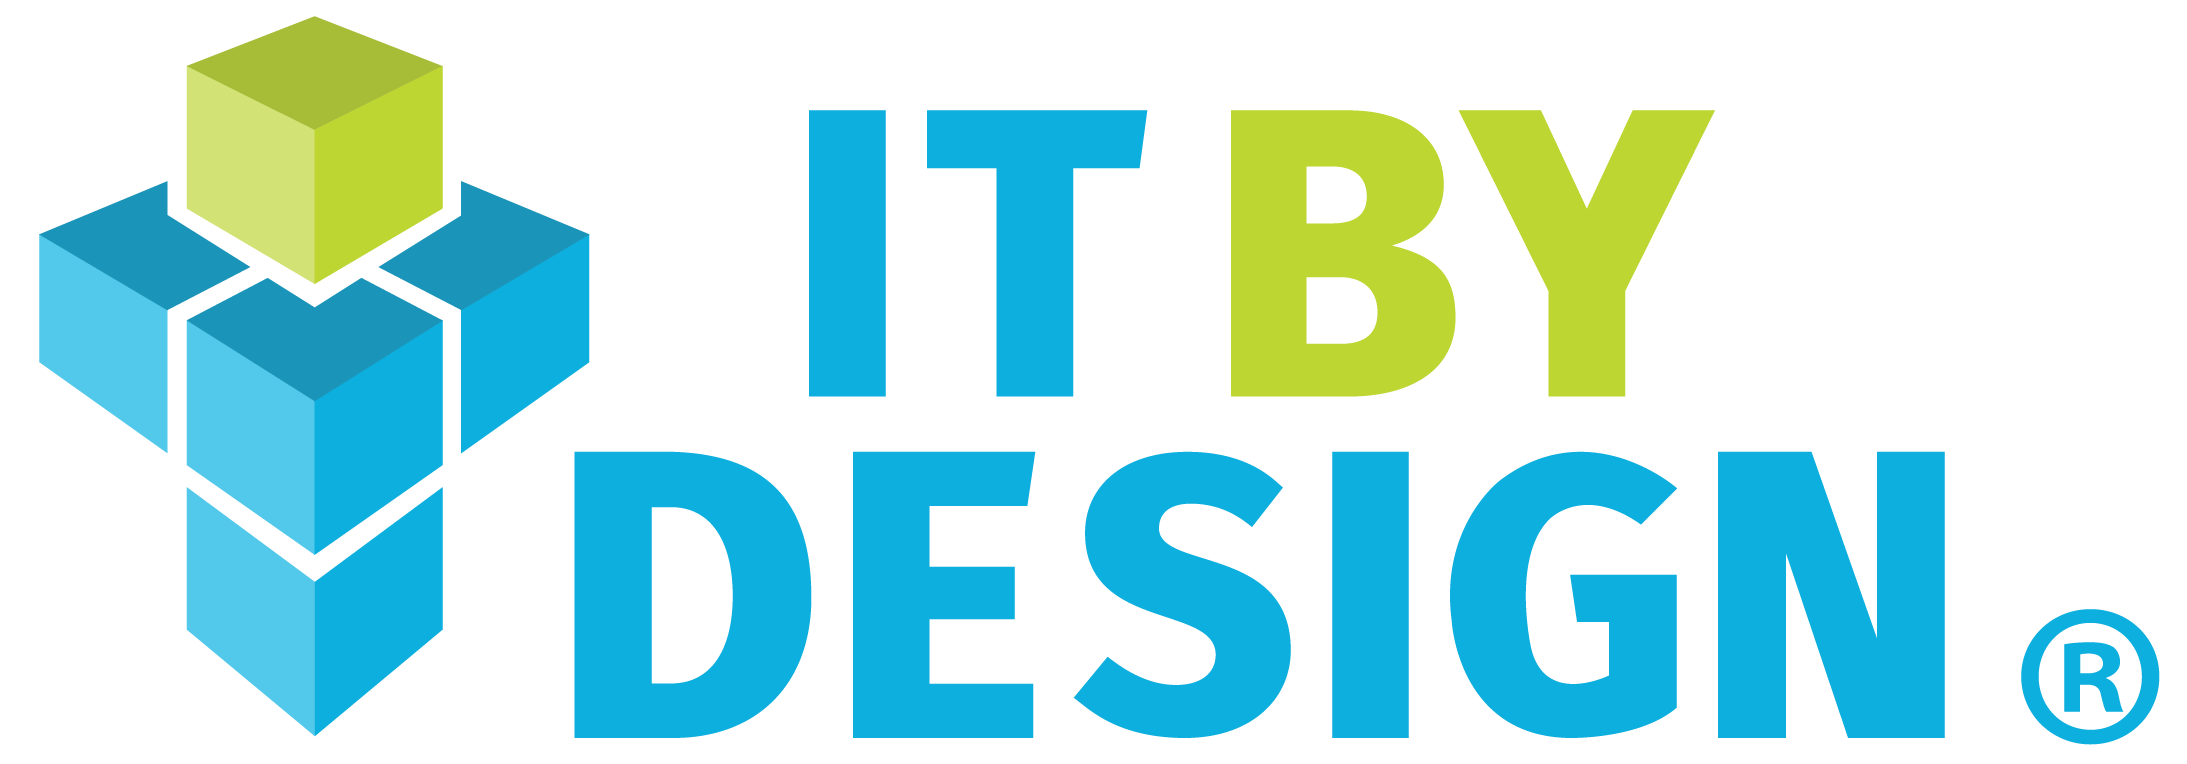 IT By Design Philippines Logo Registered